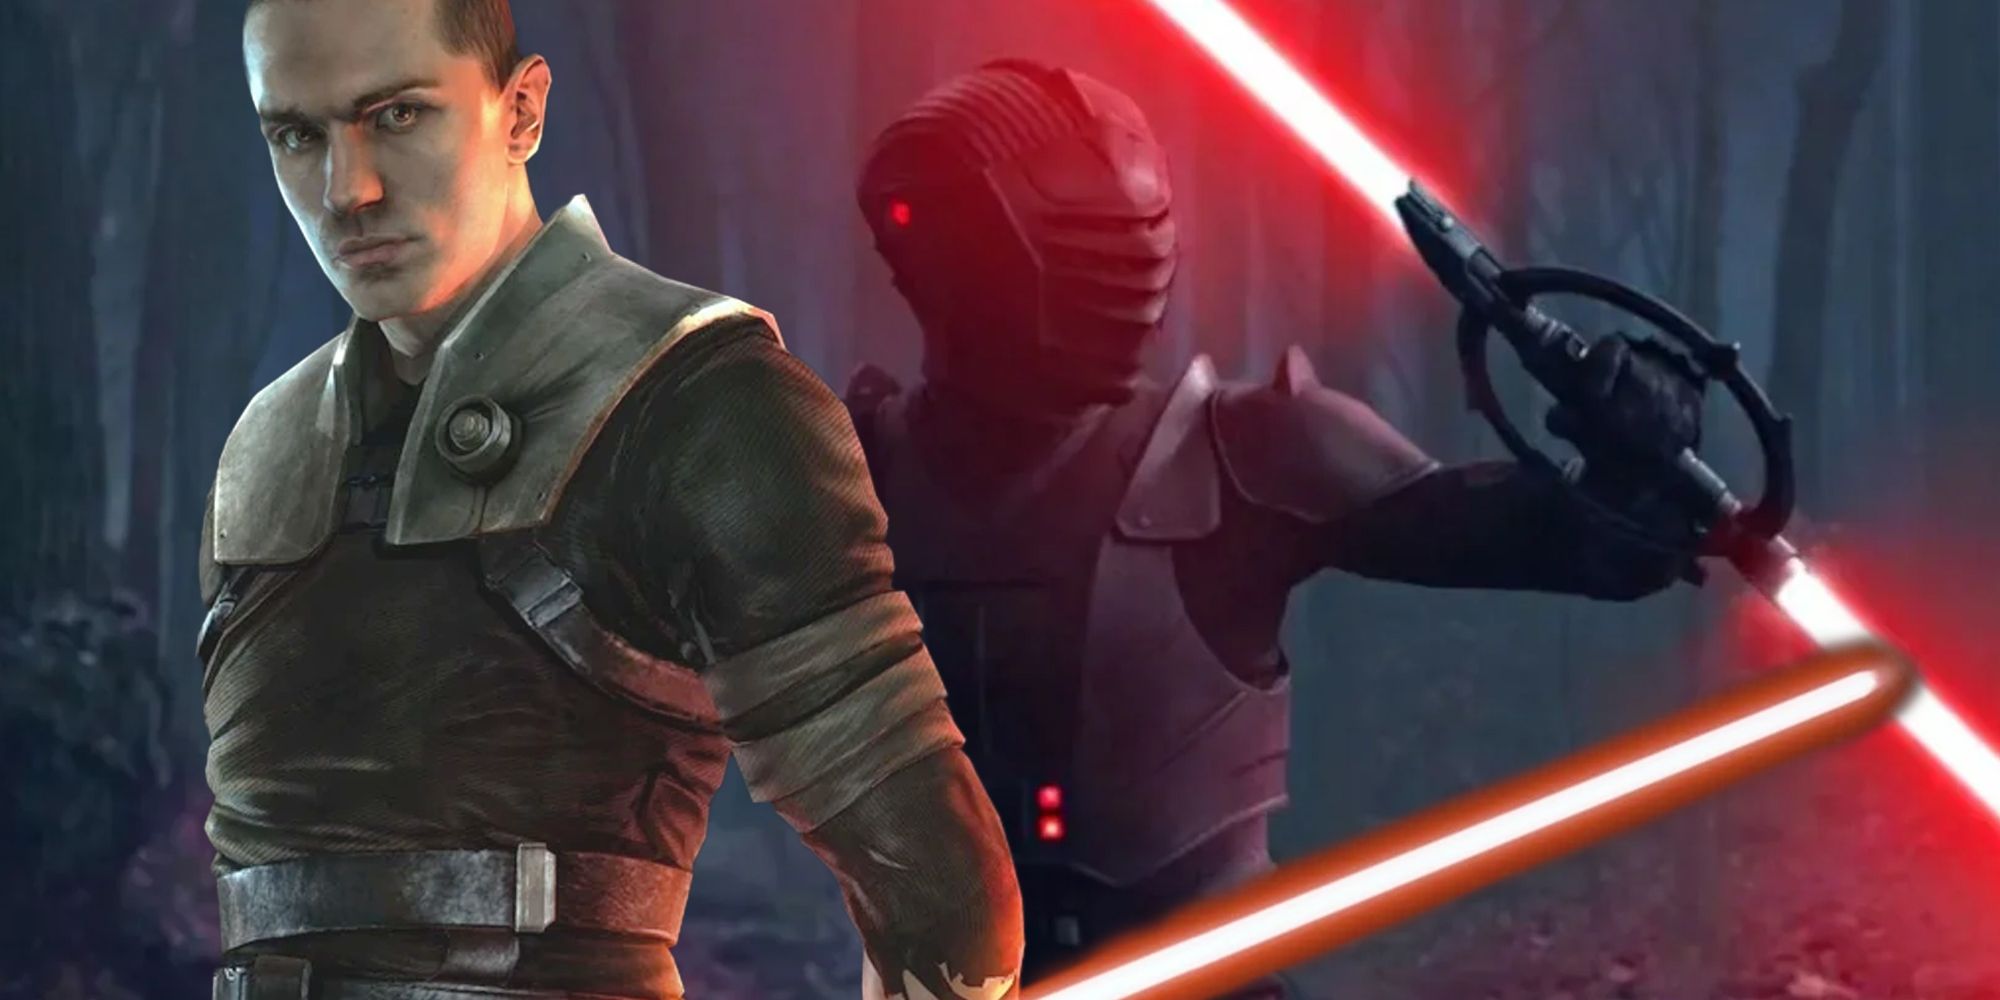 Starkiller from Star Wars: The Force Unleashed in front of Marrok from the Ahsoka Disney+ series